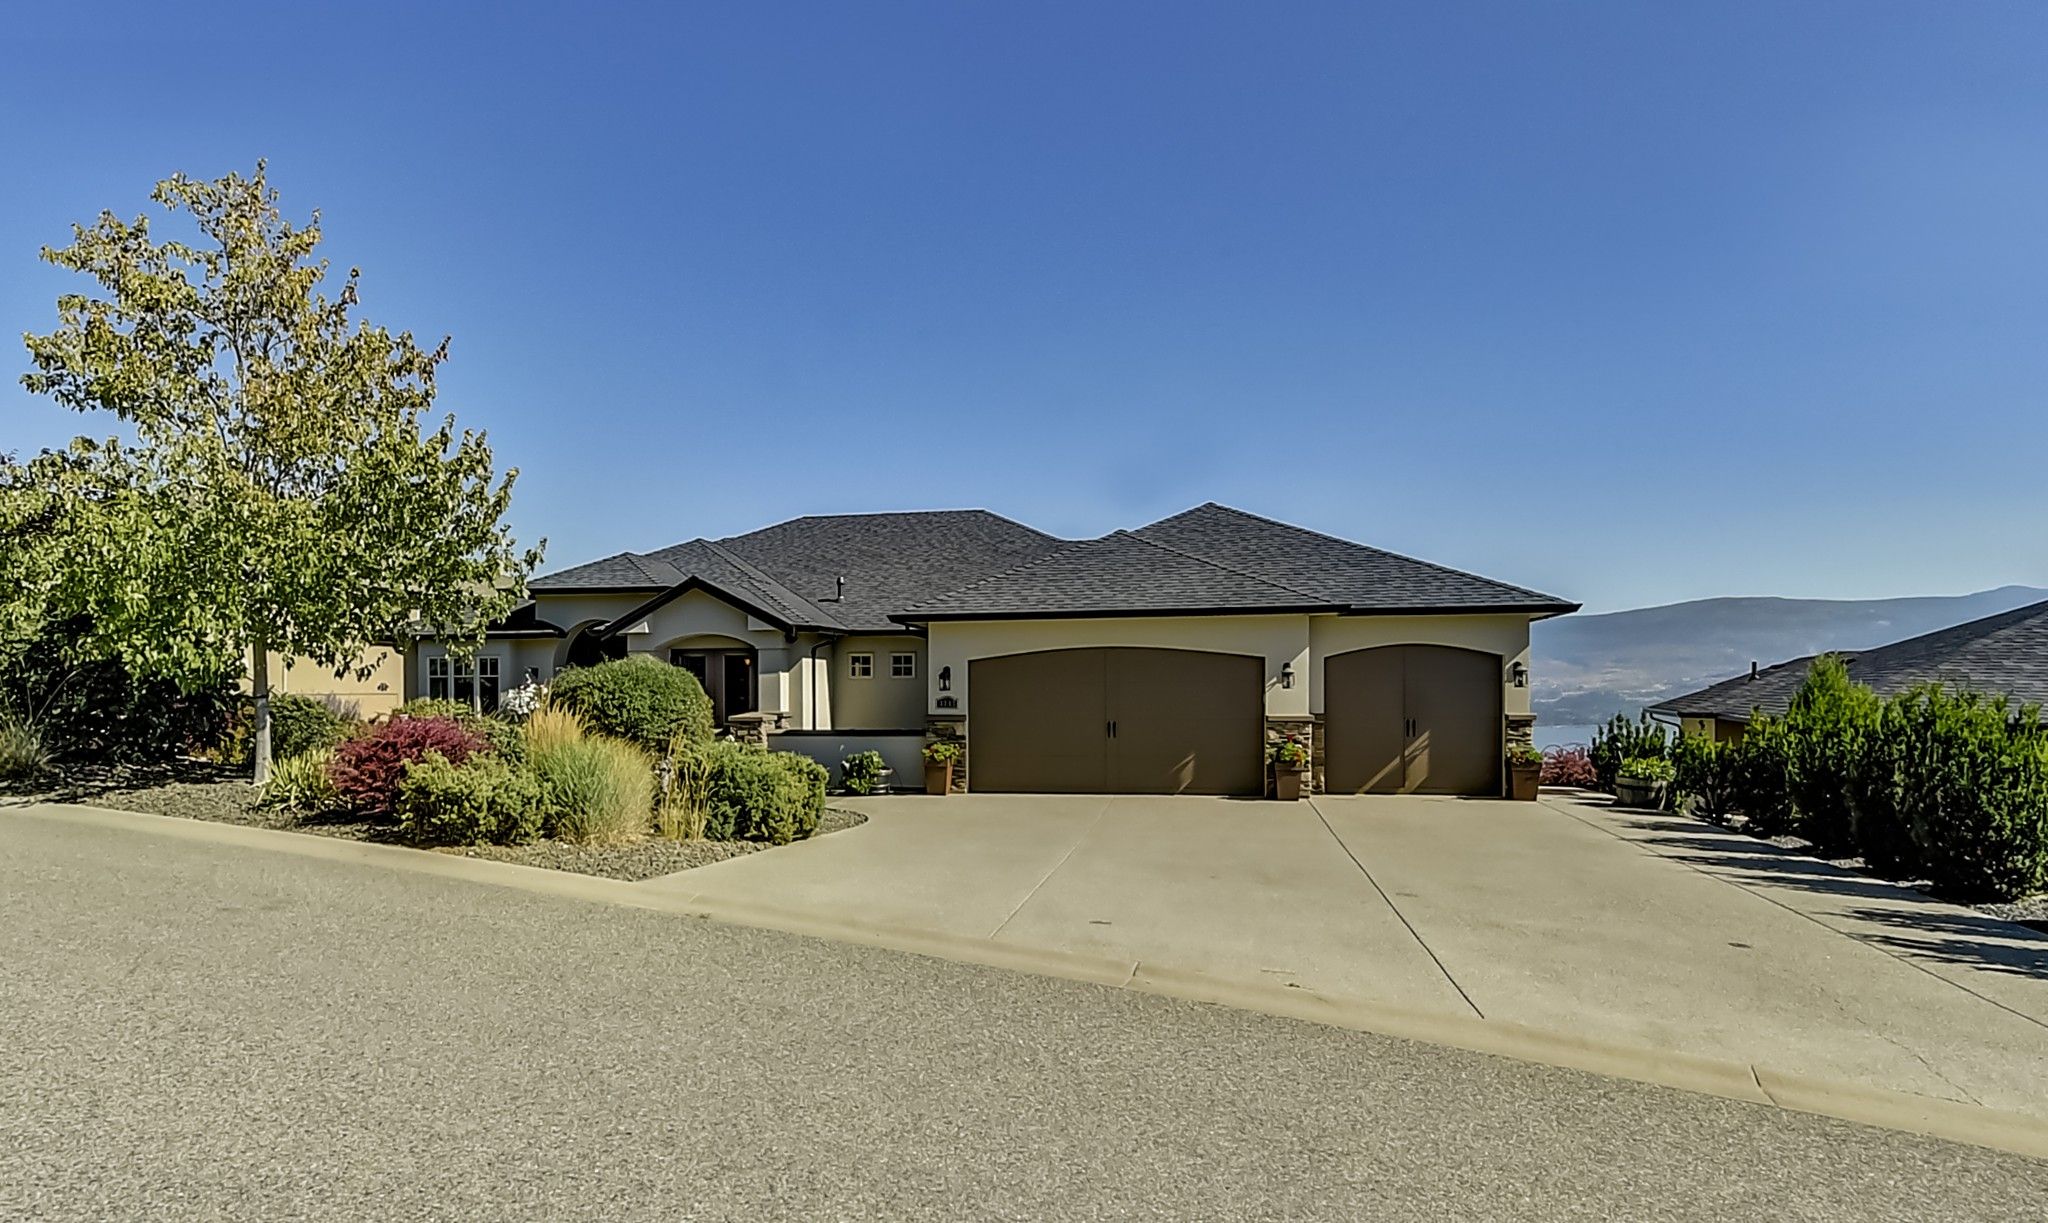 Main Photo: 3267 Vineyard View Drive in West Kelowna: Lakeview Heights House for sale (Central Okanagan)  : MLS®# 10215068